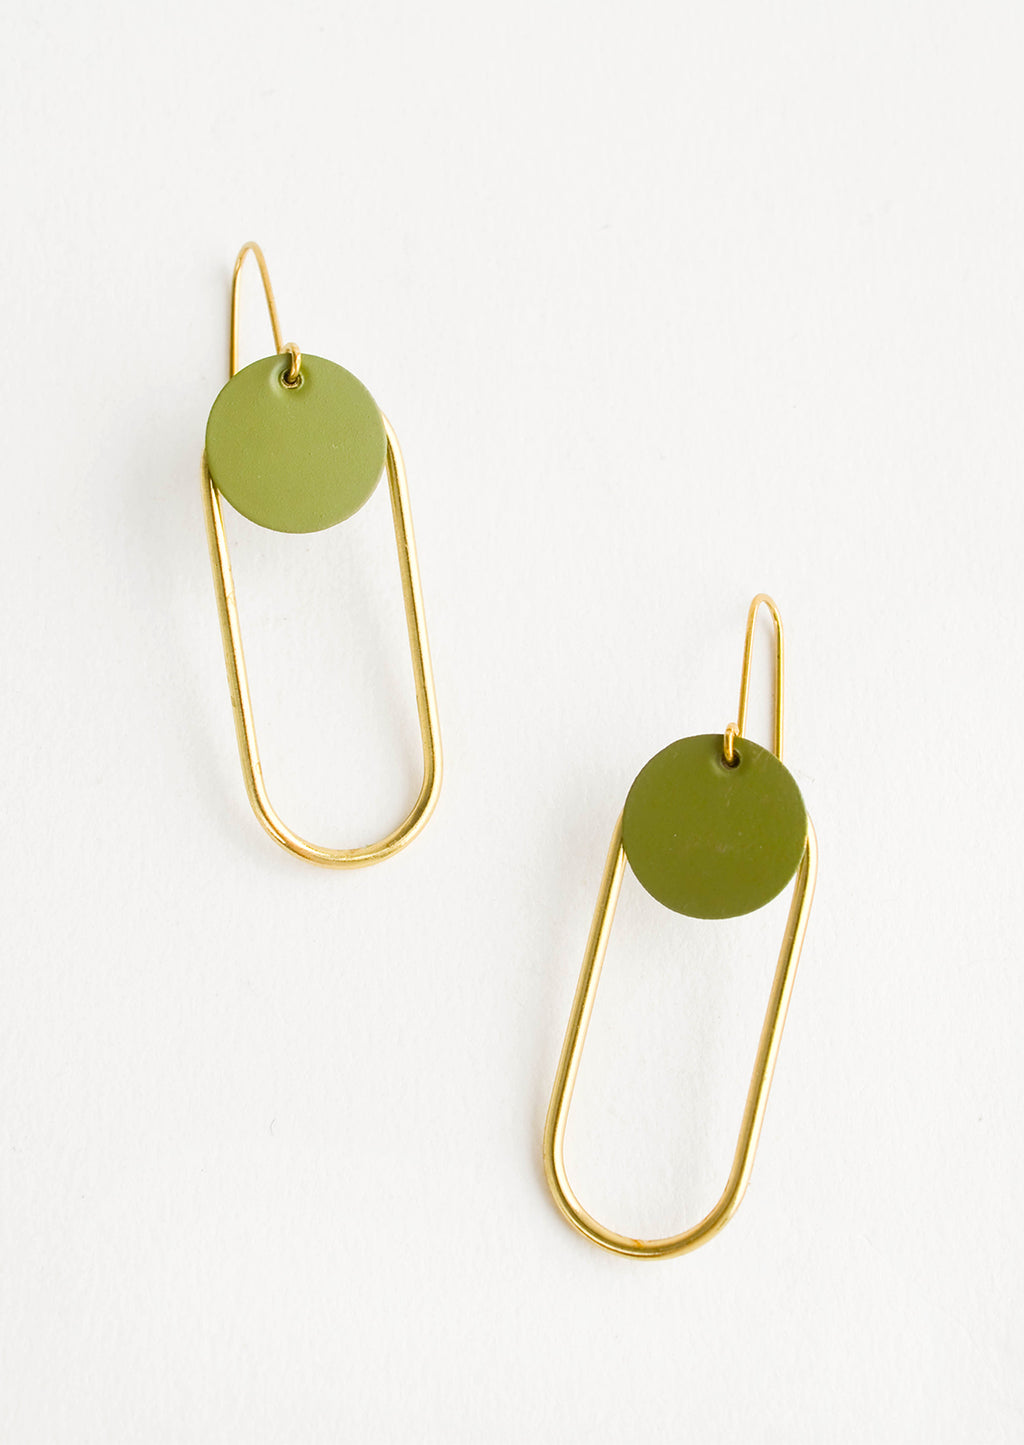 Olive: Pair of earrings in the shape of a hollow brass oval with a green dot at the top.